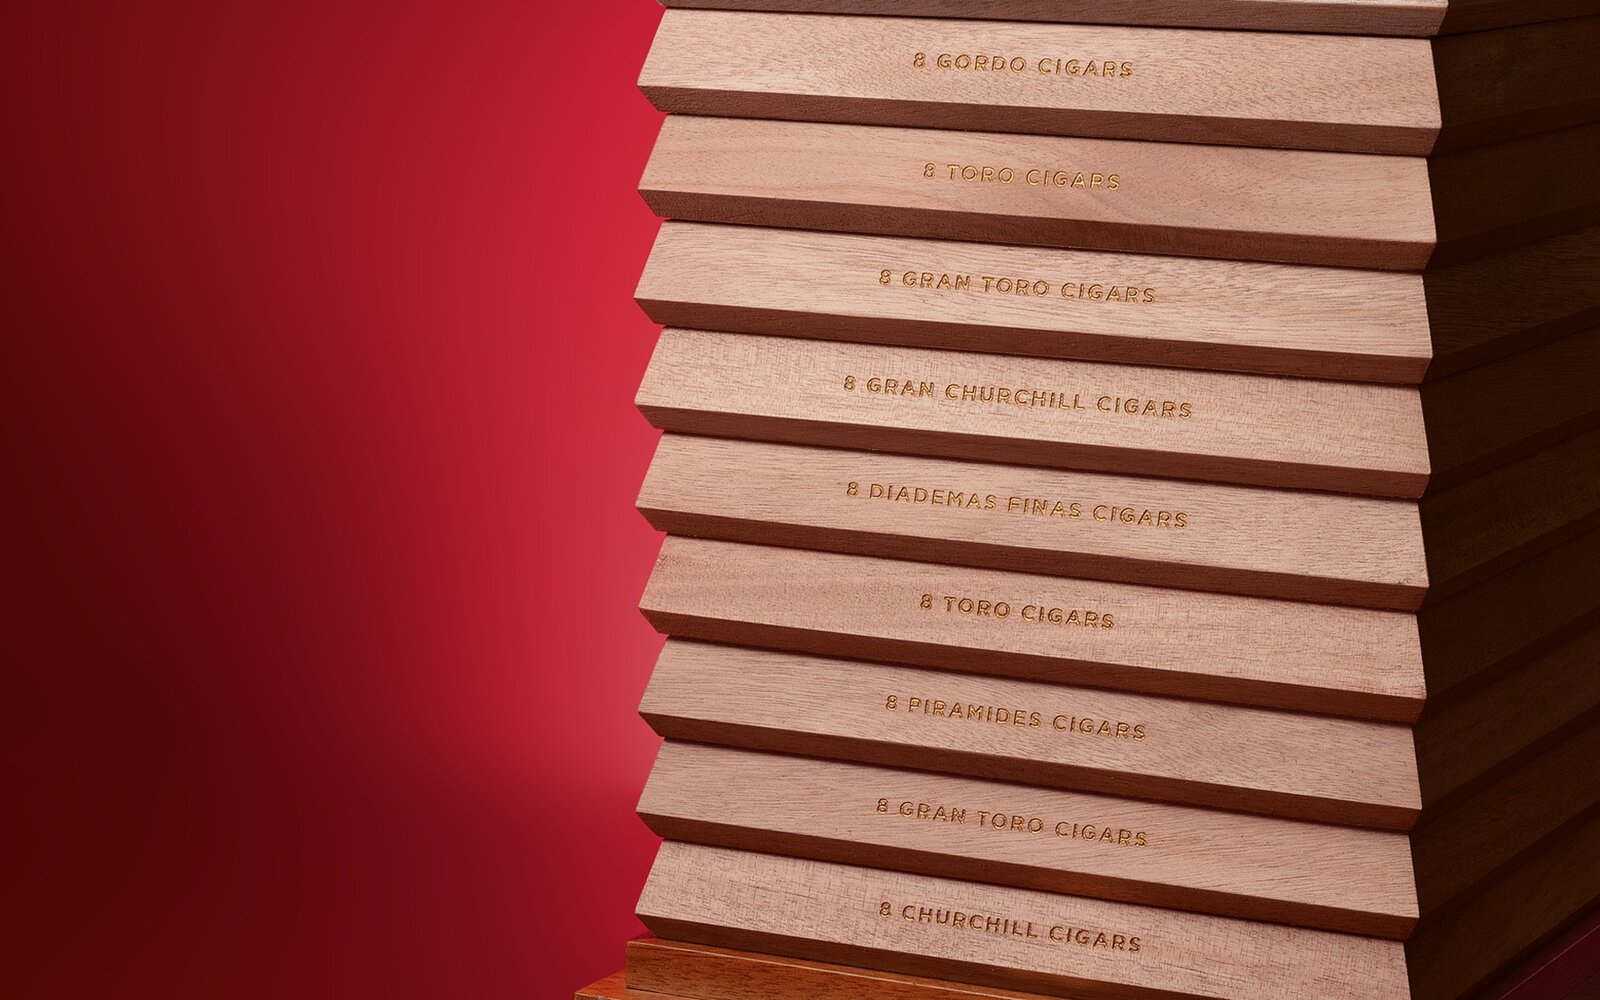 The Davidoff The Year of Collector’s Edition consisting of its stacked wooden trays and a striking red casing.